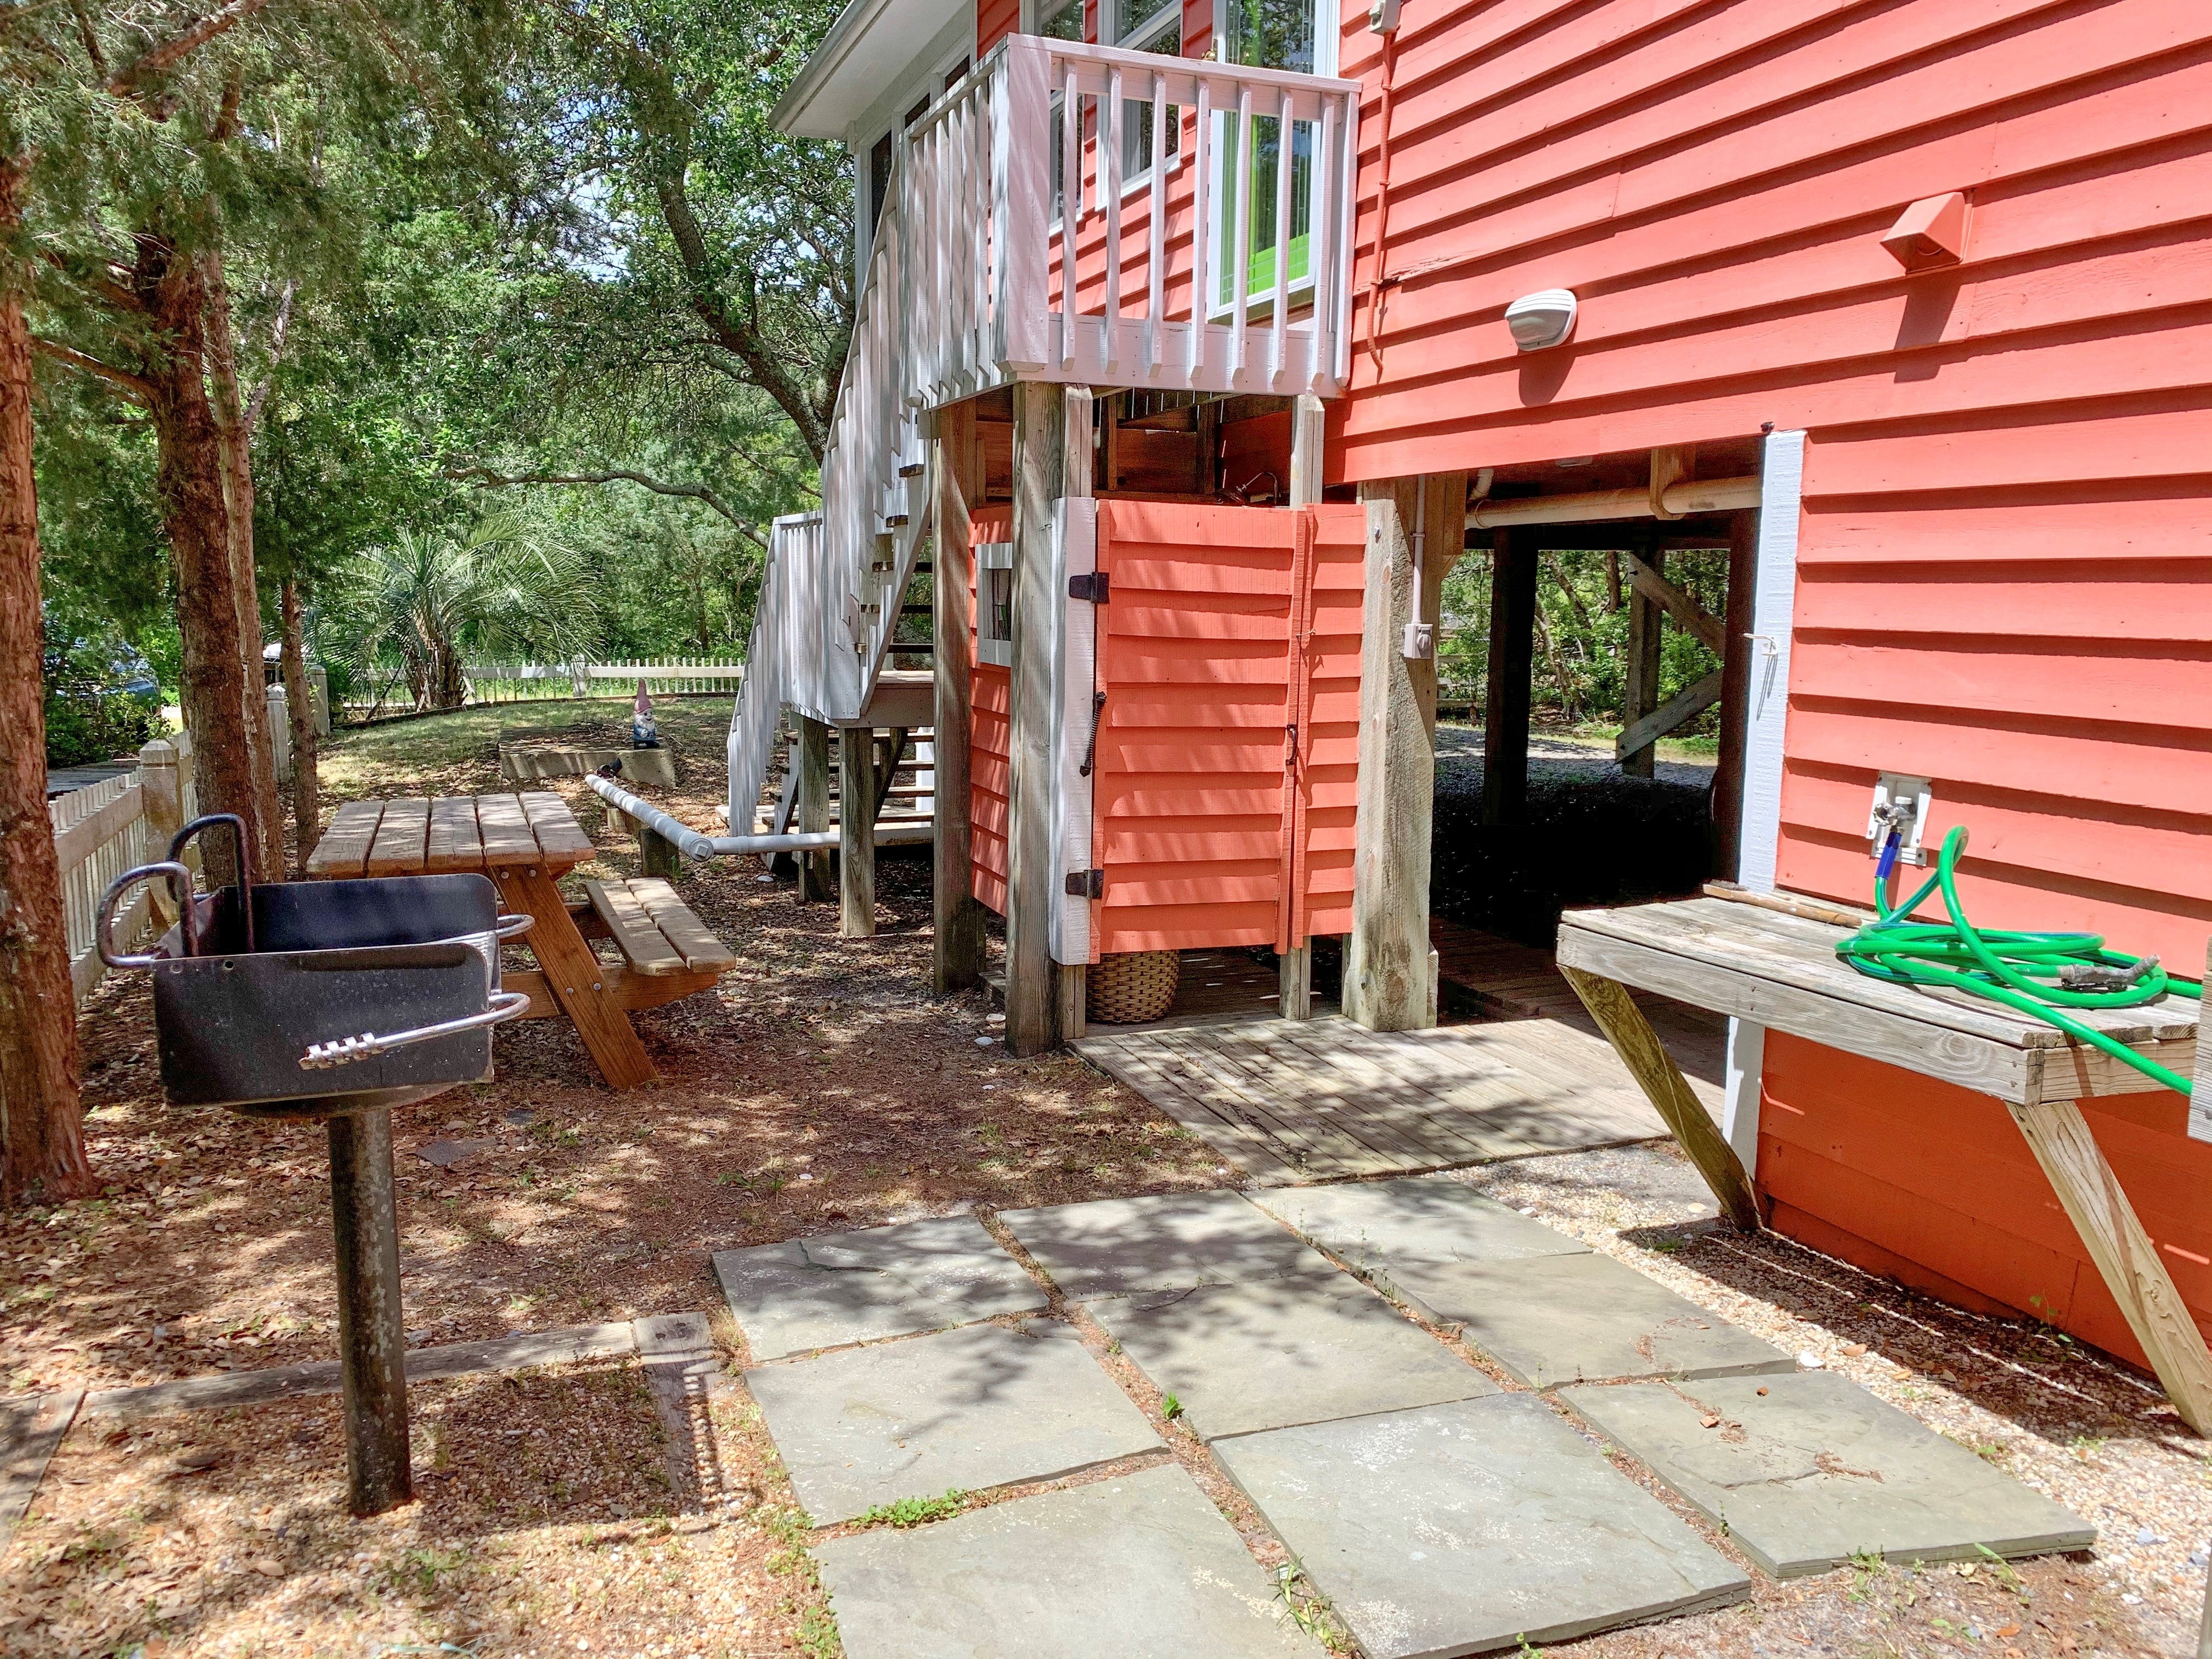 Charcoal Grill, Fish Bench, Outdoor Shower, and Picnic Table